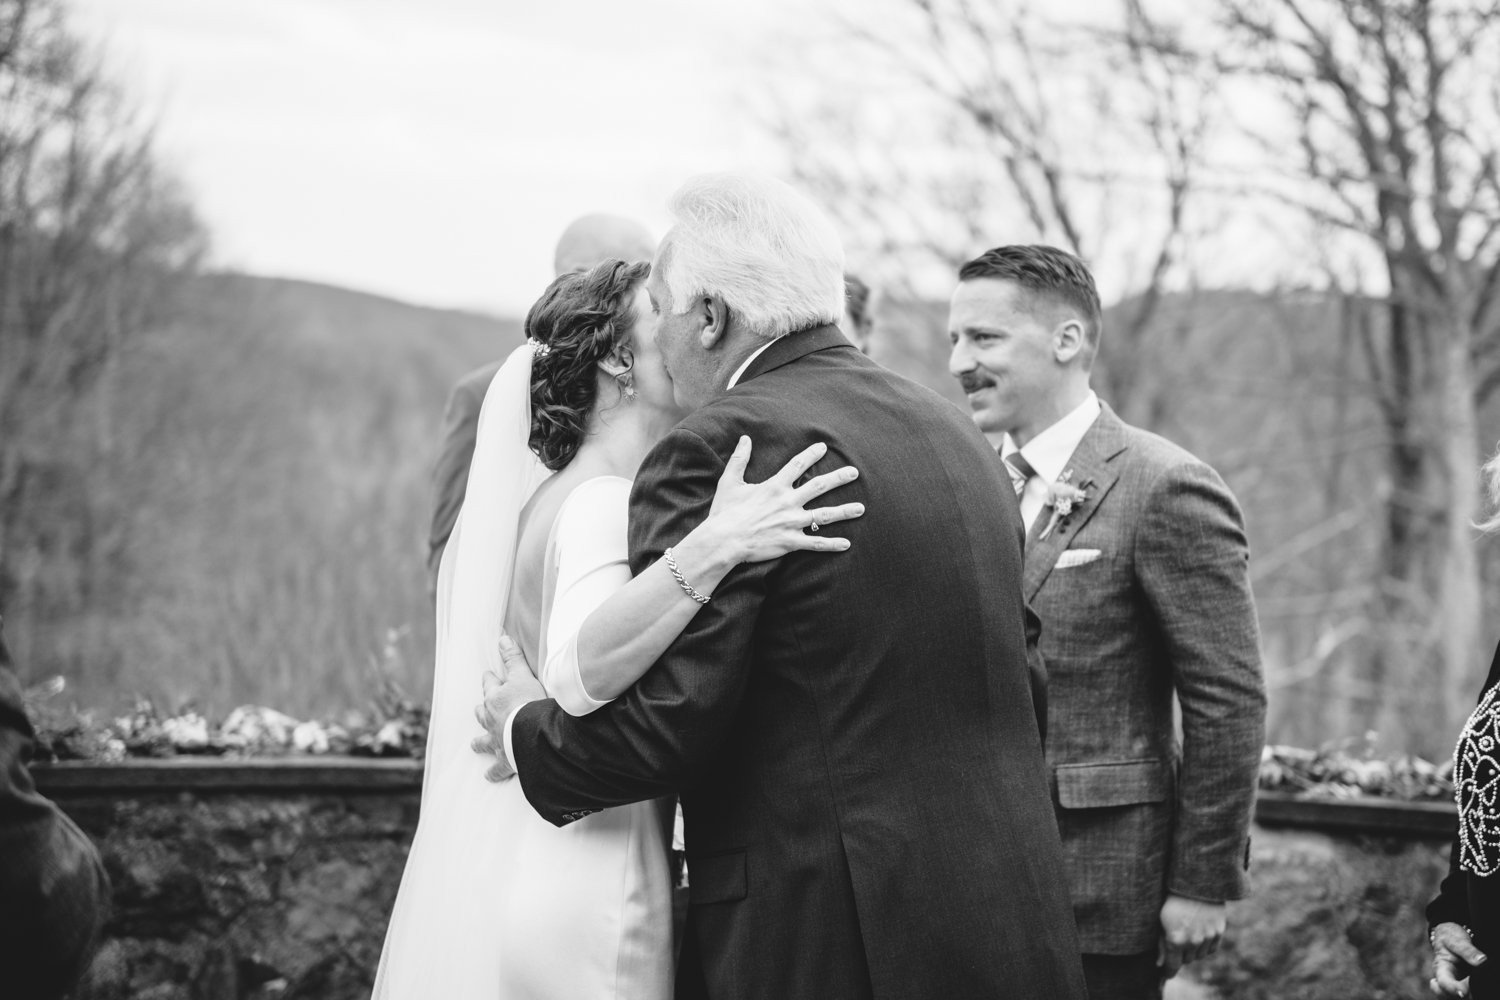 Bride and her father kiss on the cheek at the altar.
Upstate New York Wedding Photography. Cold Spring NY Wedding Photography. Luxury Local Wedding Photographer. Destination Wedding Photographer.